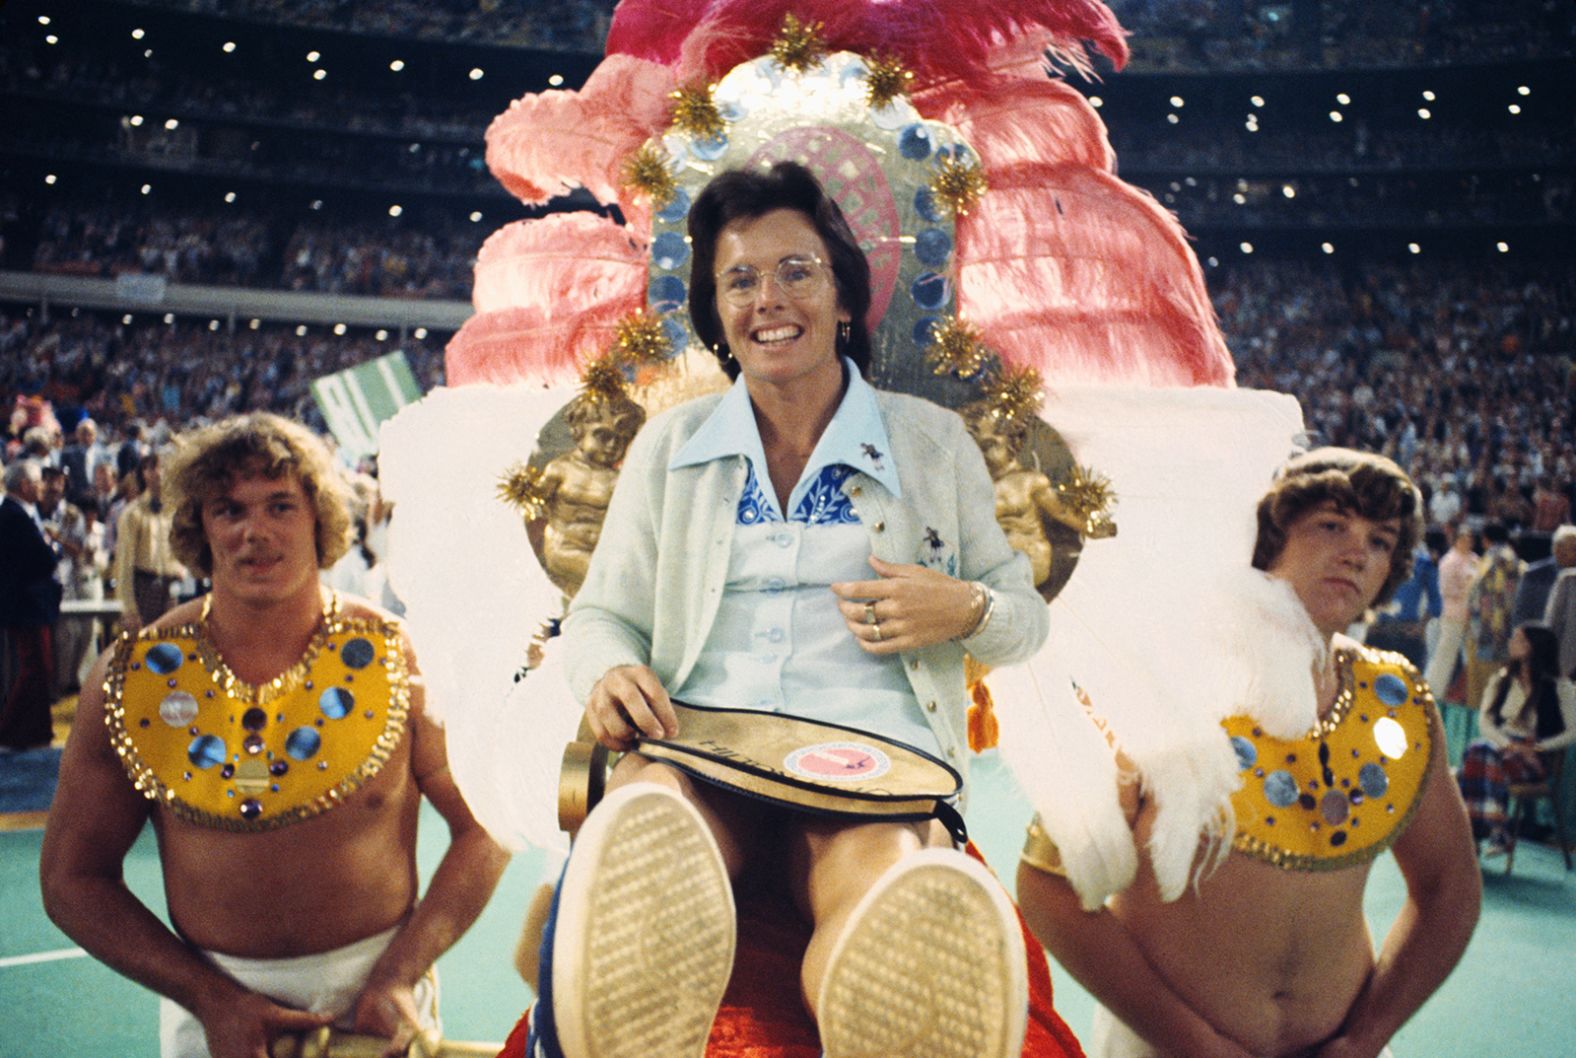 Tennis champion and LGBTQ advocate Billie Jean King helped pave the way for the fight for women's equality in the world of sports. In 1973, she helped form the Women's Tennis Association and threatened to boycott the US Open if the winner of the women's singles title wasn't paid as much as her male counterpart. King is seen here being carried to the tennis court by four men during her famous "Battle of the Sexes" match against Bobby Riggs.